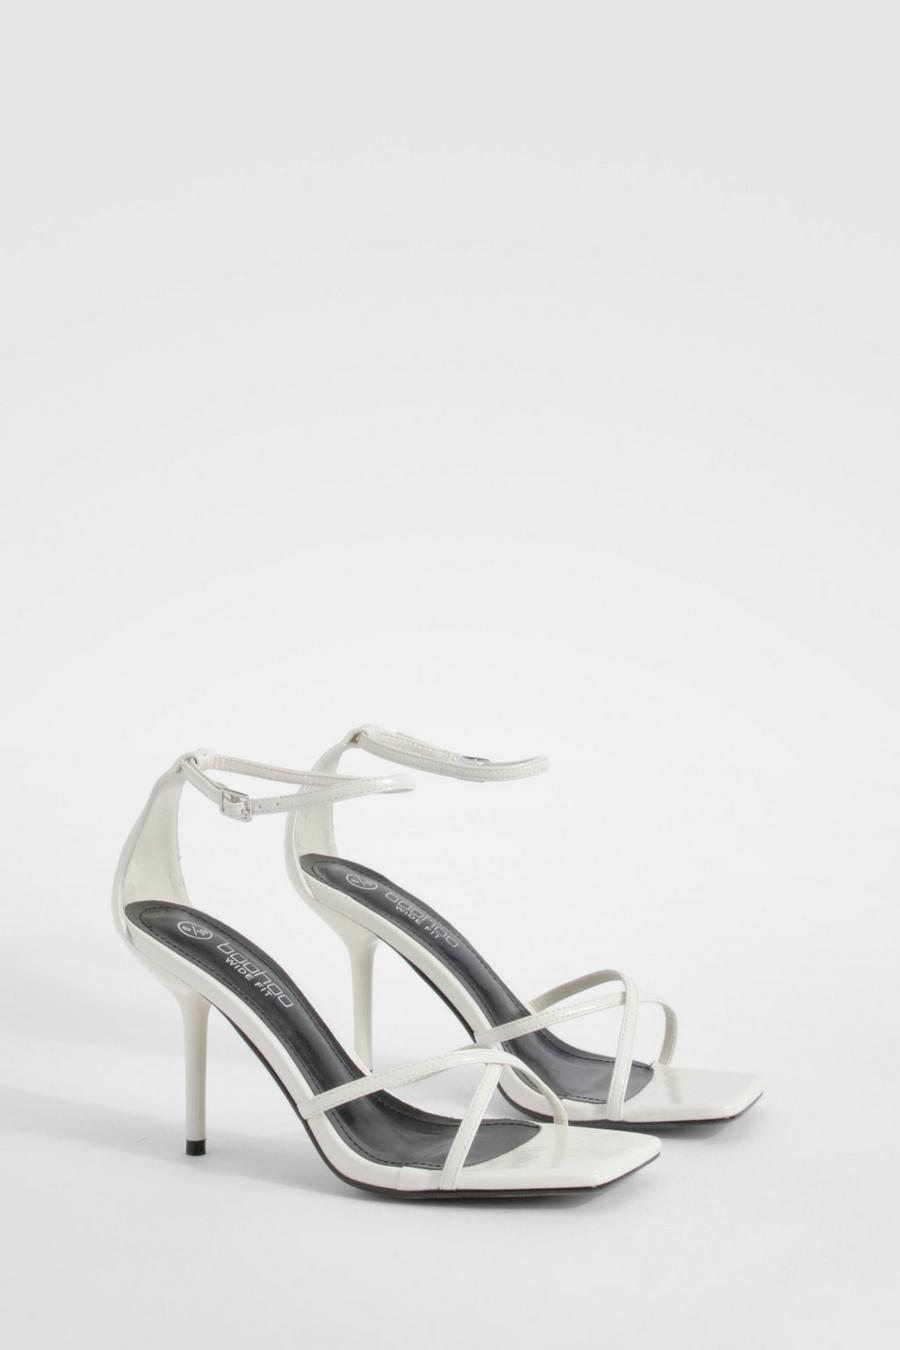 Off white Wide Fit Stiletto Crossover Barely There Heels